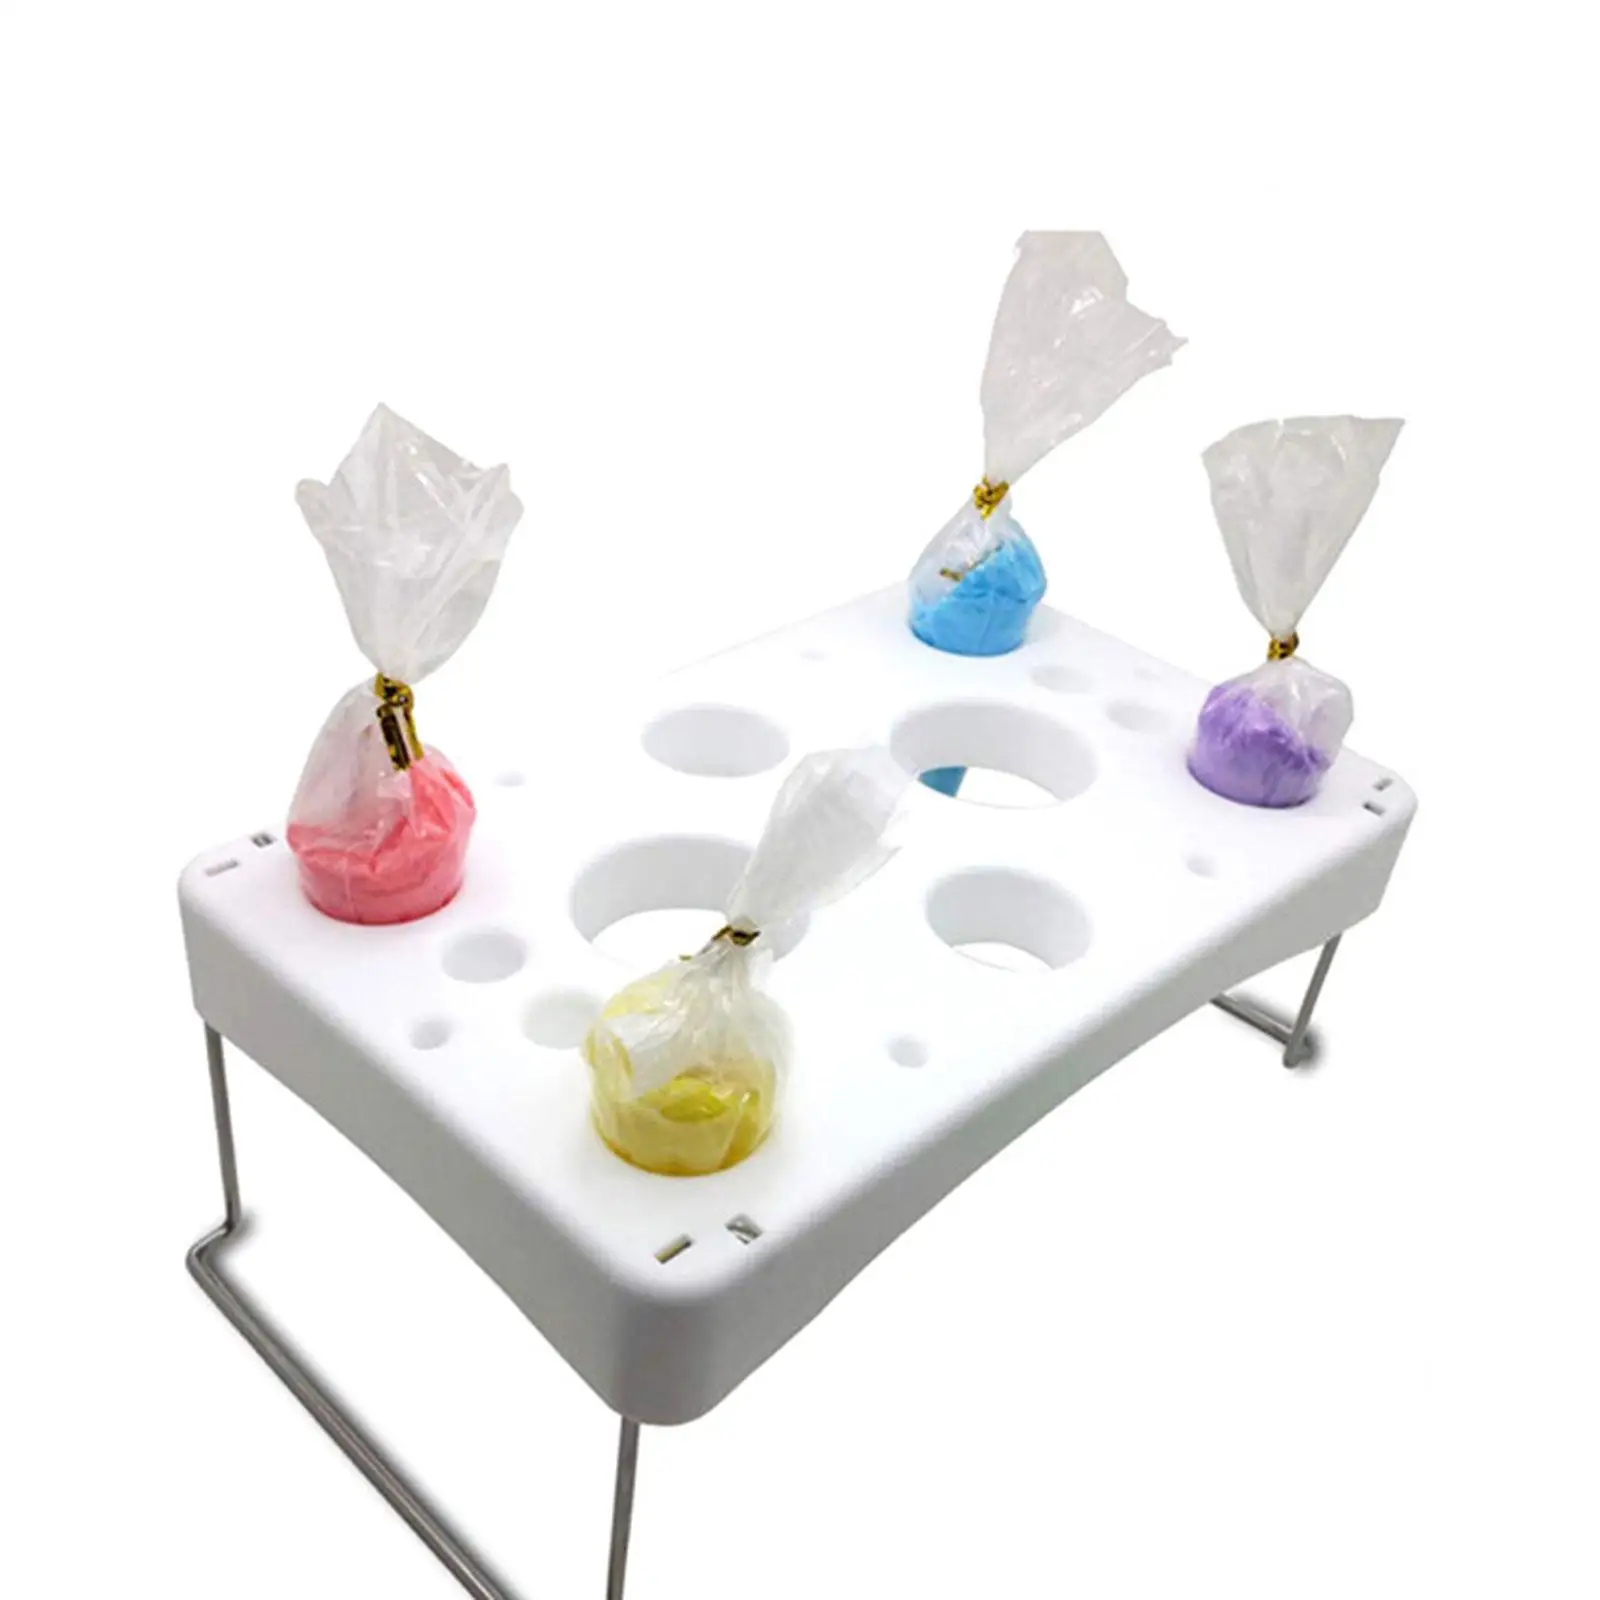 Piping Bag Stand Storage Display Tray Baking Accessories for Placement Stand